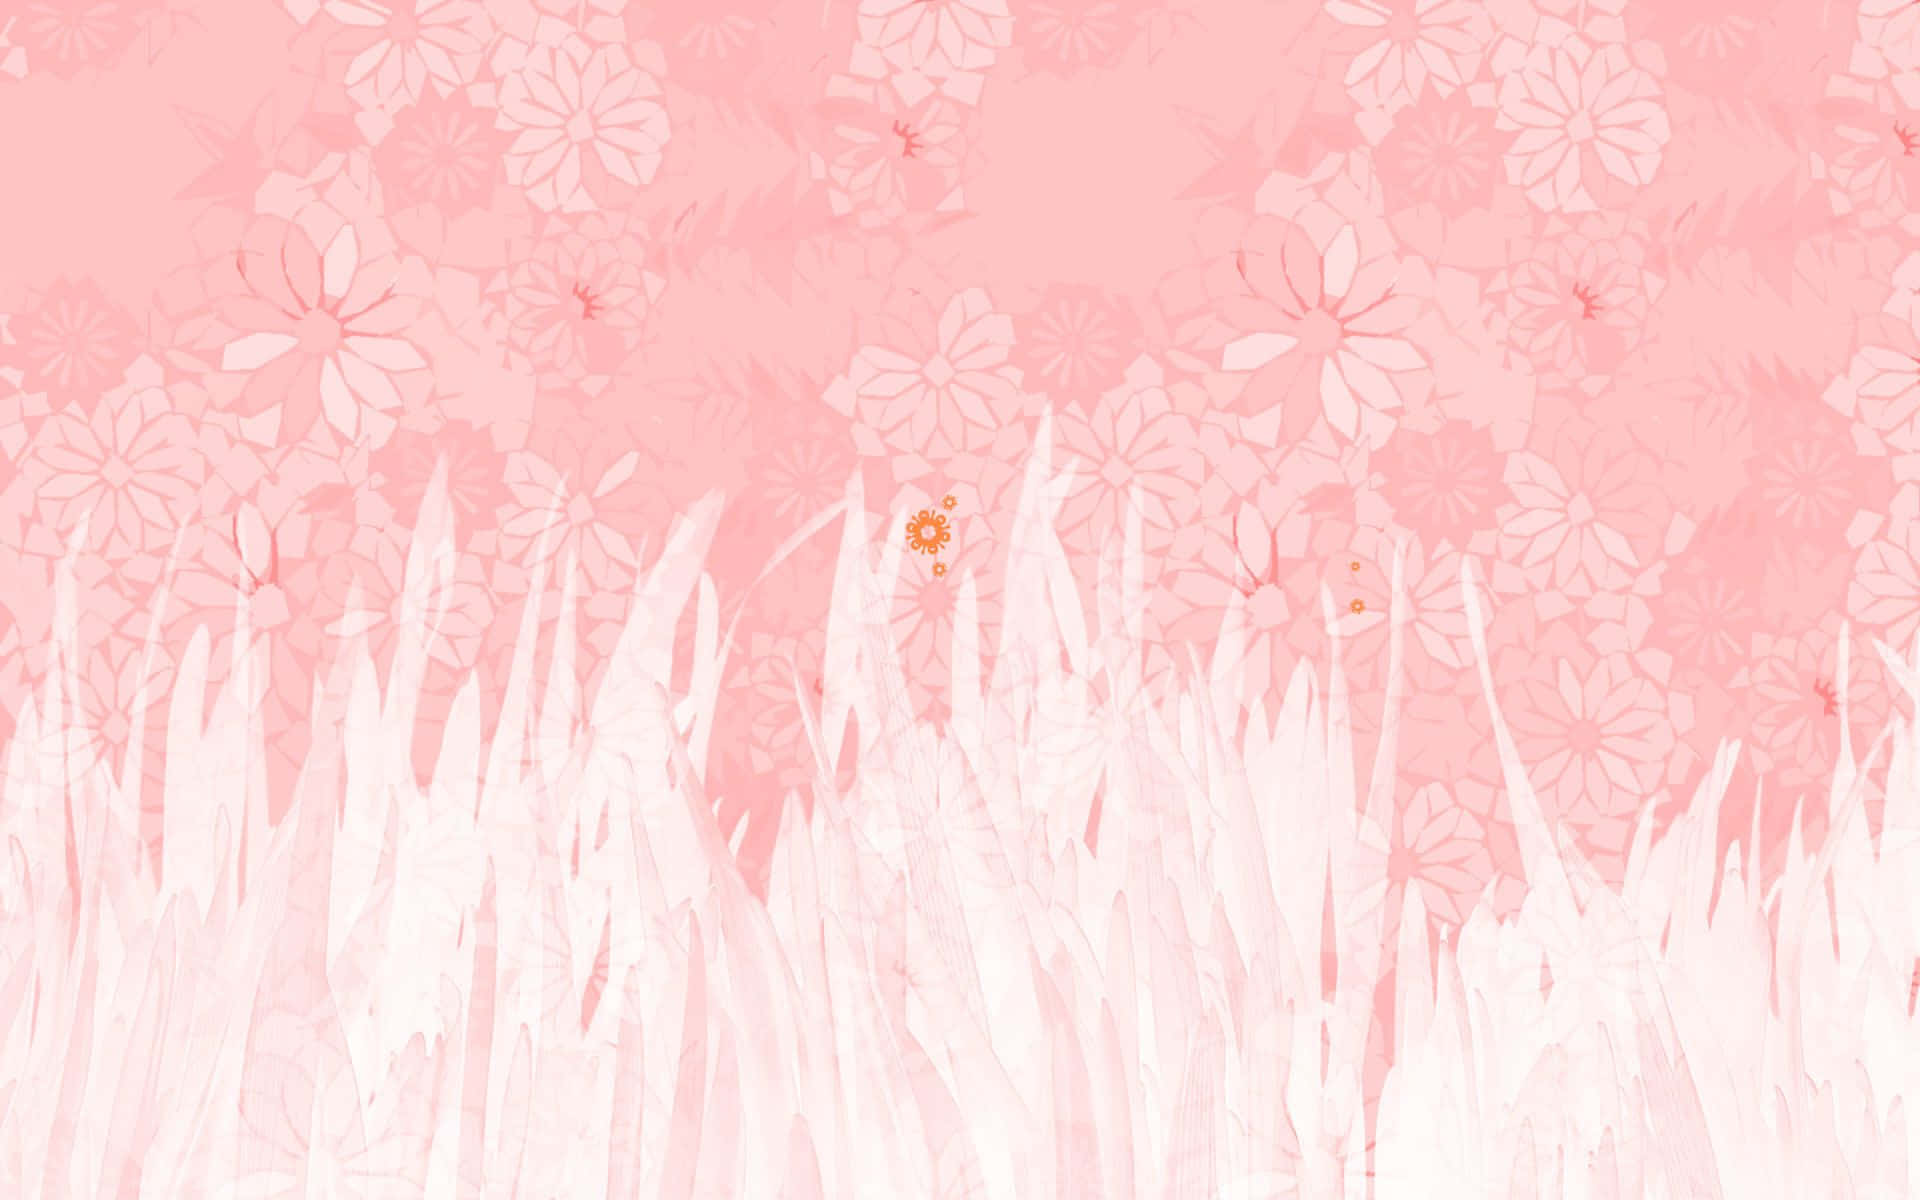 A bright and cheerful soft pink background